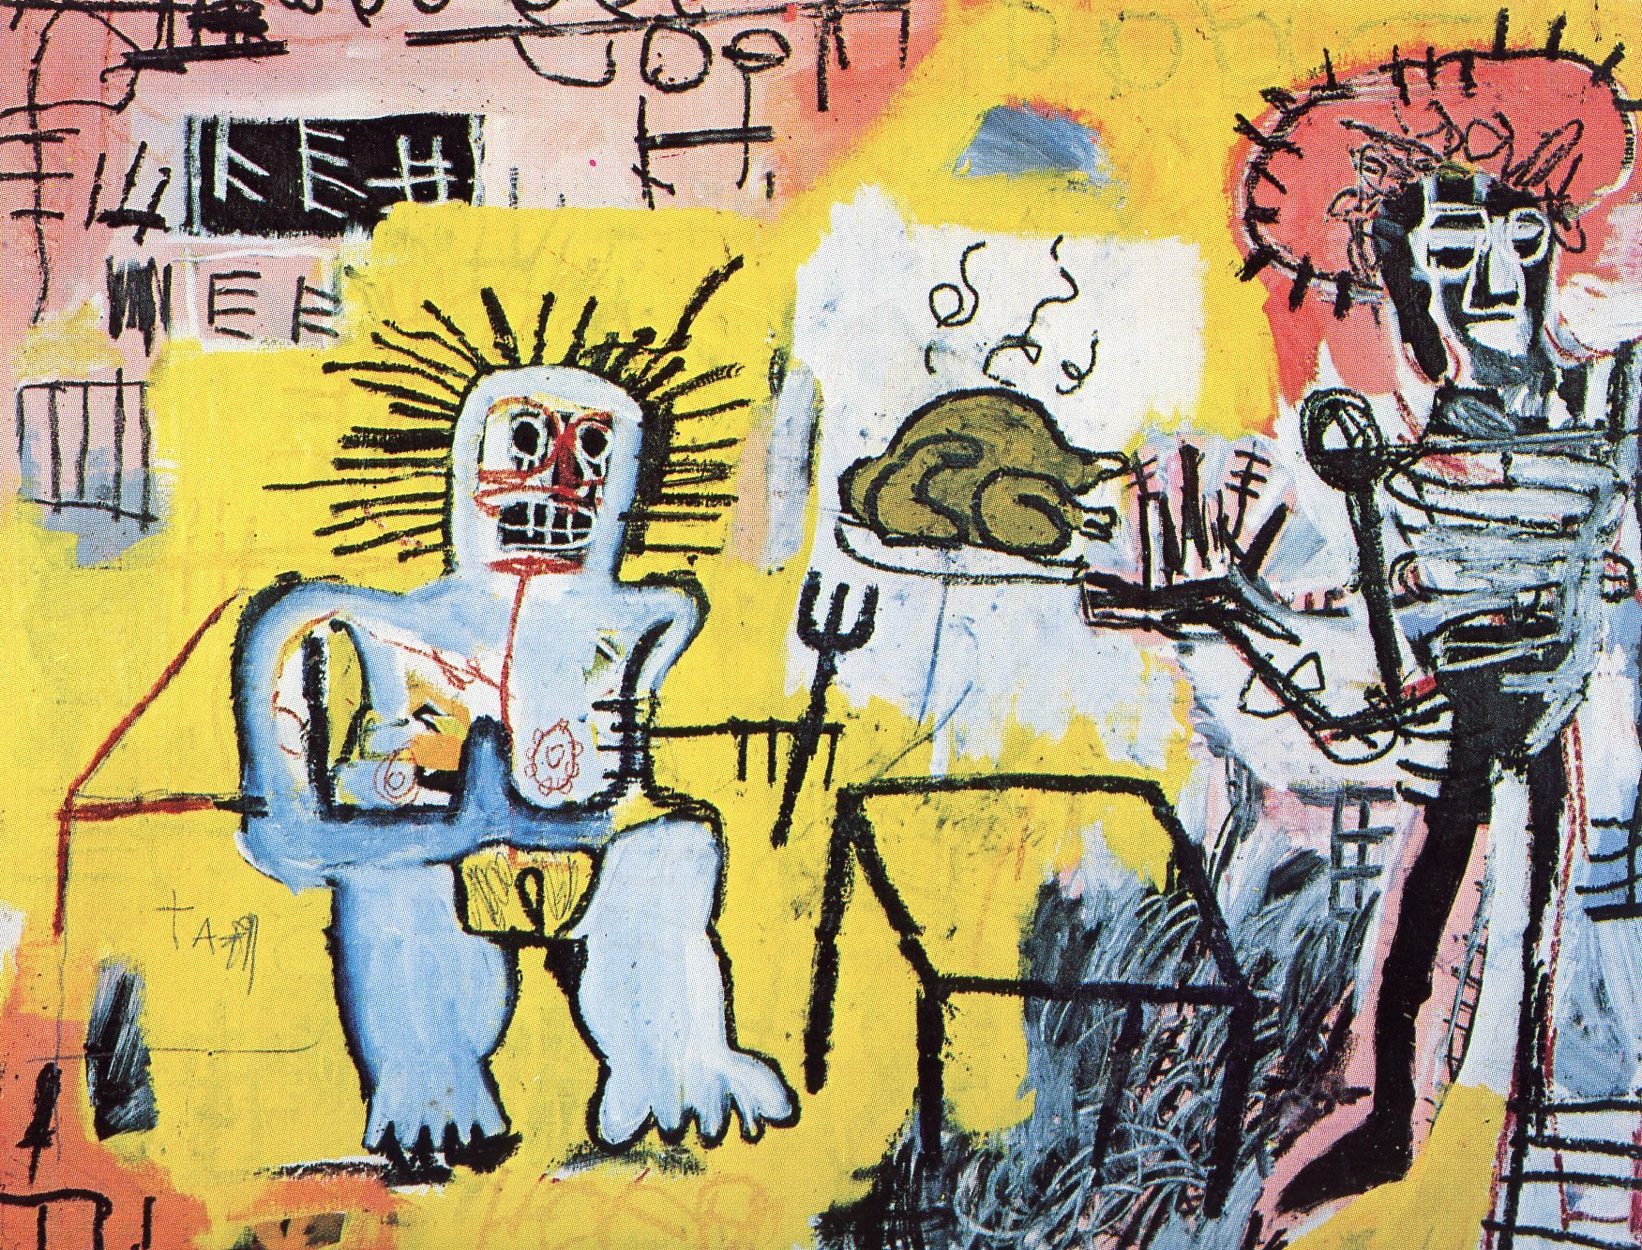 JEAN MICHEL BASQUIAT STEPHEN SPROUSE AND OTHERS Graffiti Jac